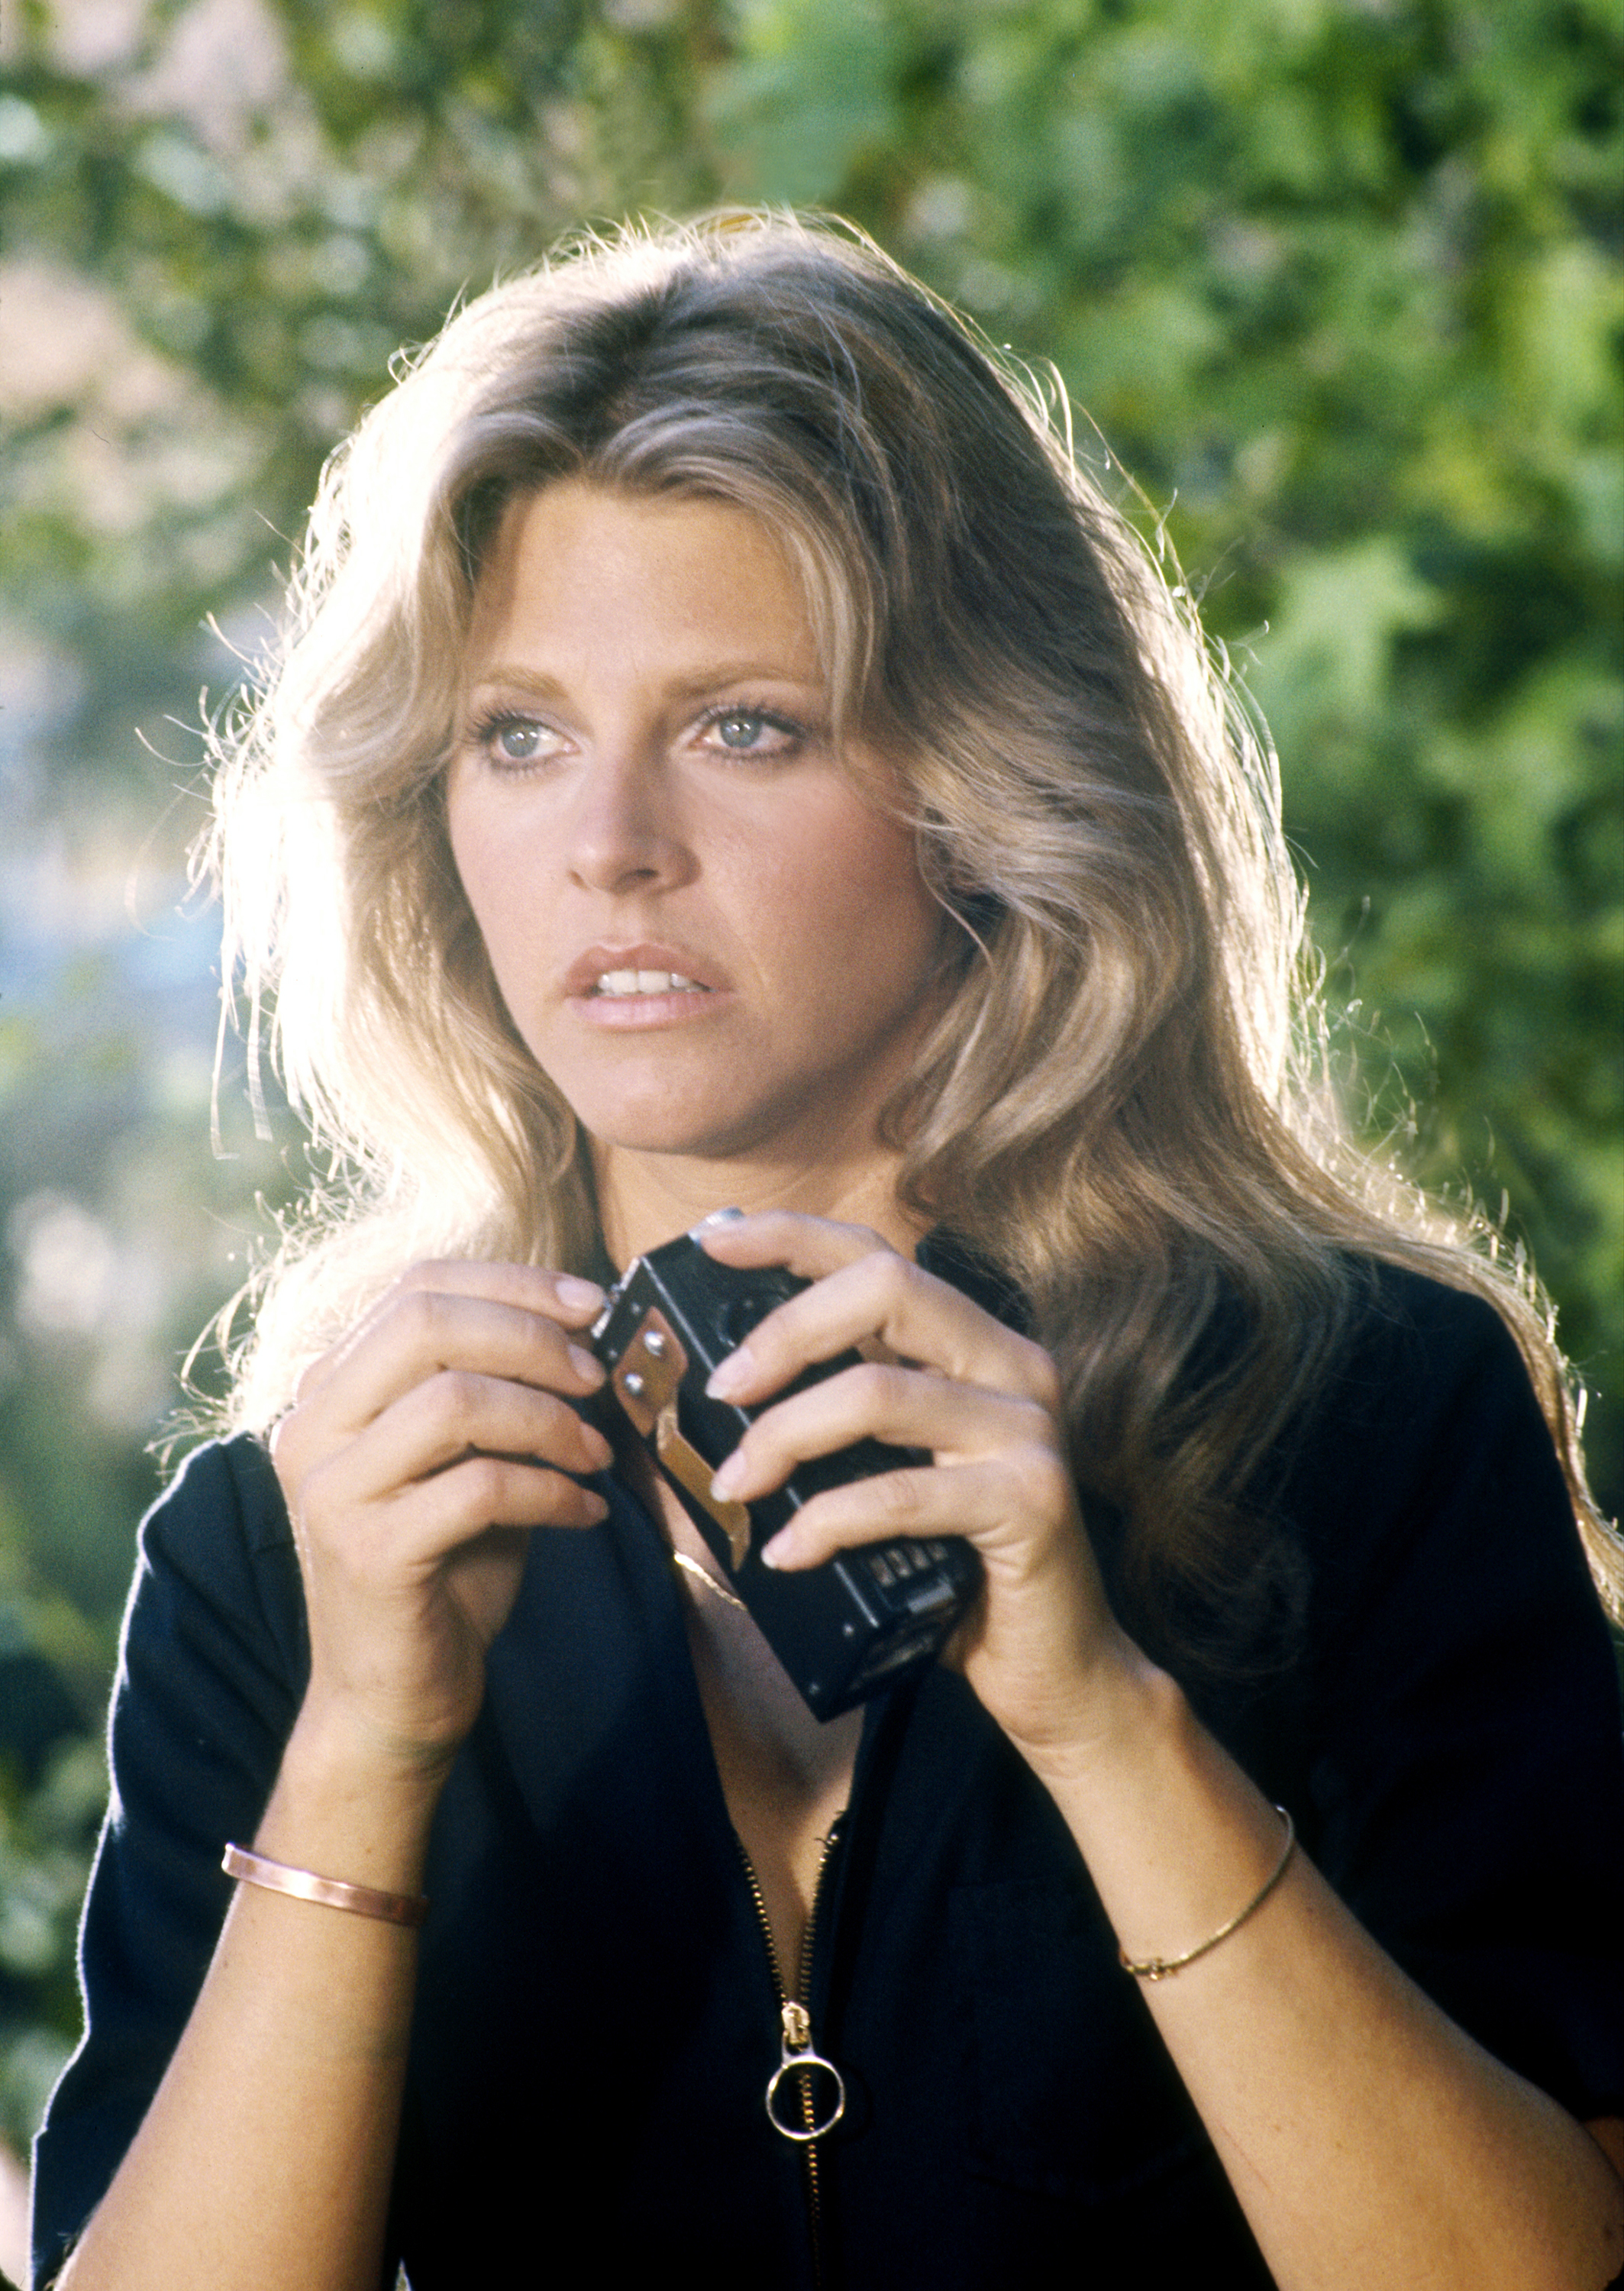 Lindsay Wagner in the scene of "The Bionic Woman," 1976 | Source: Getty Images